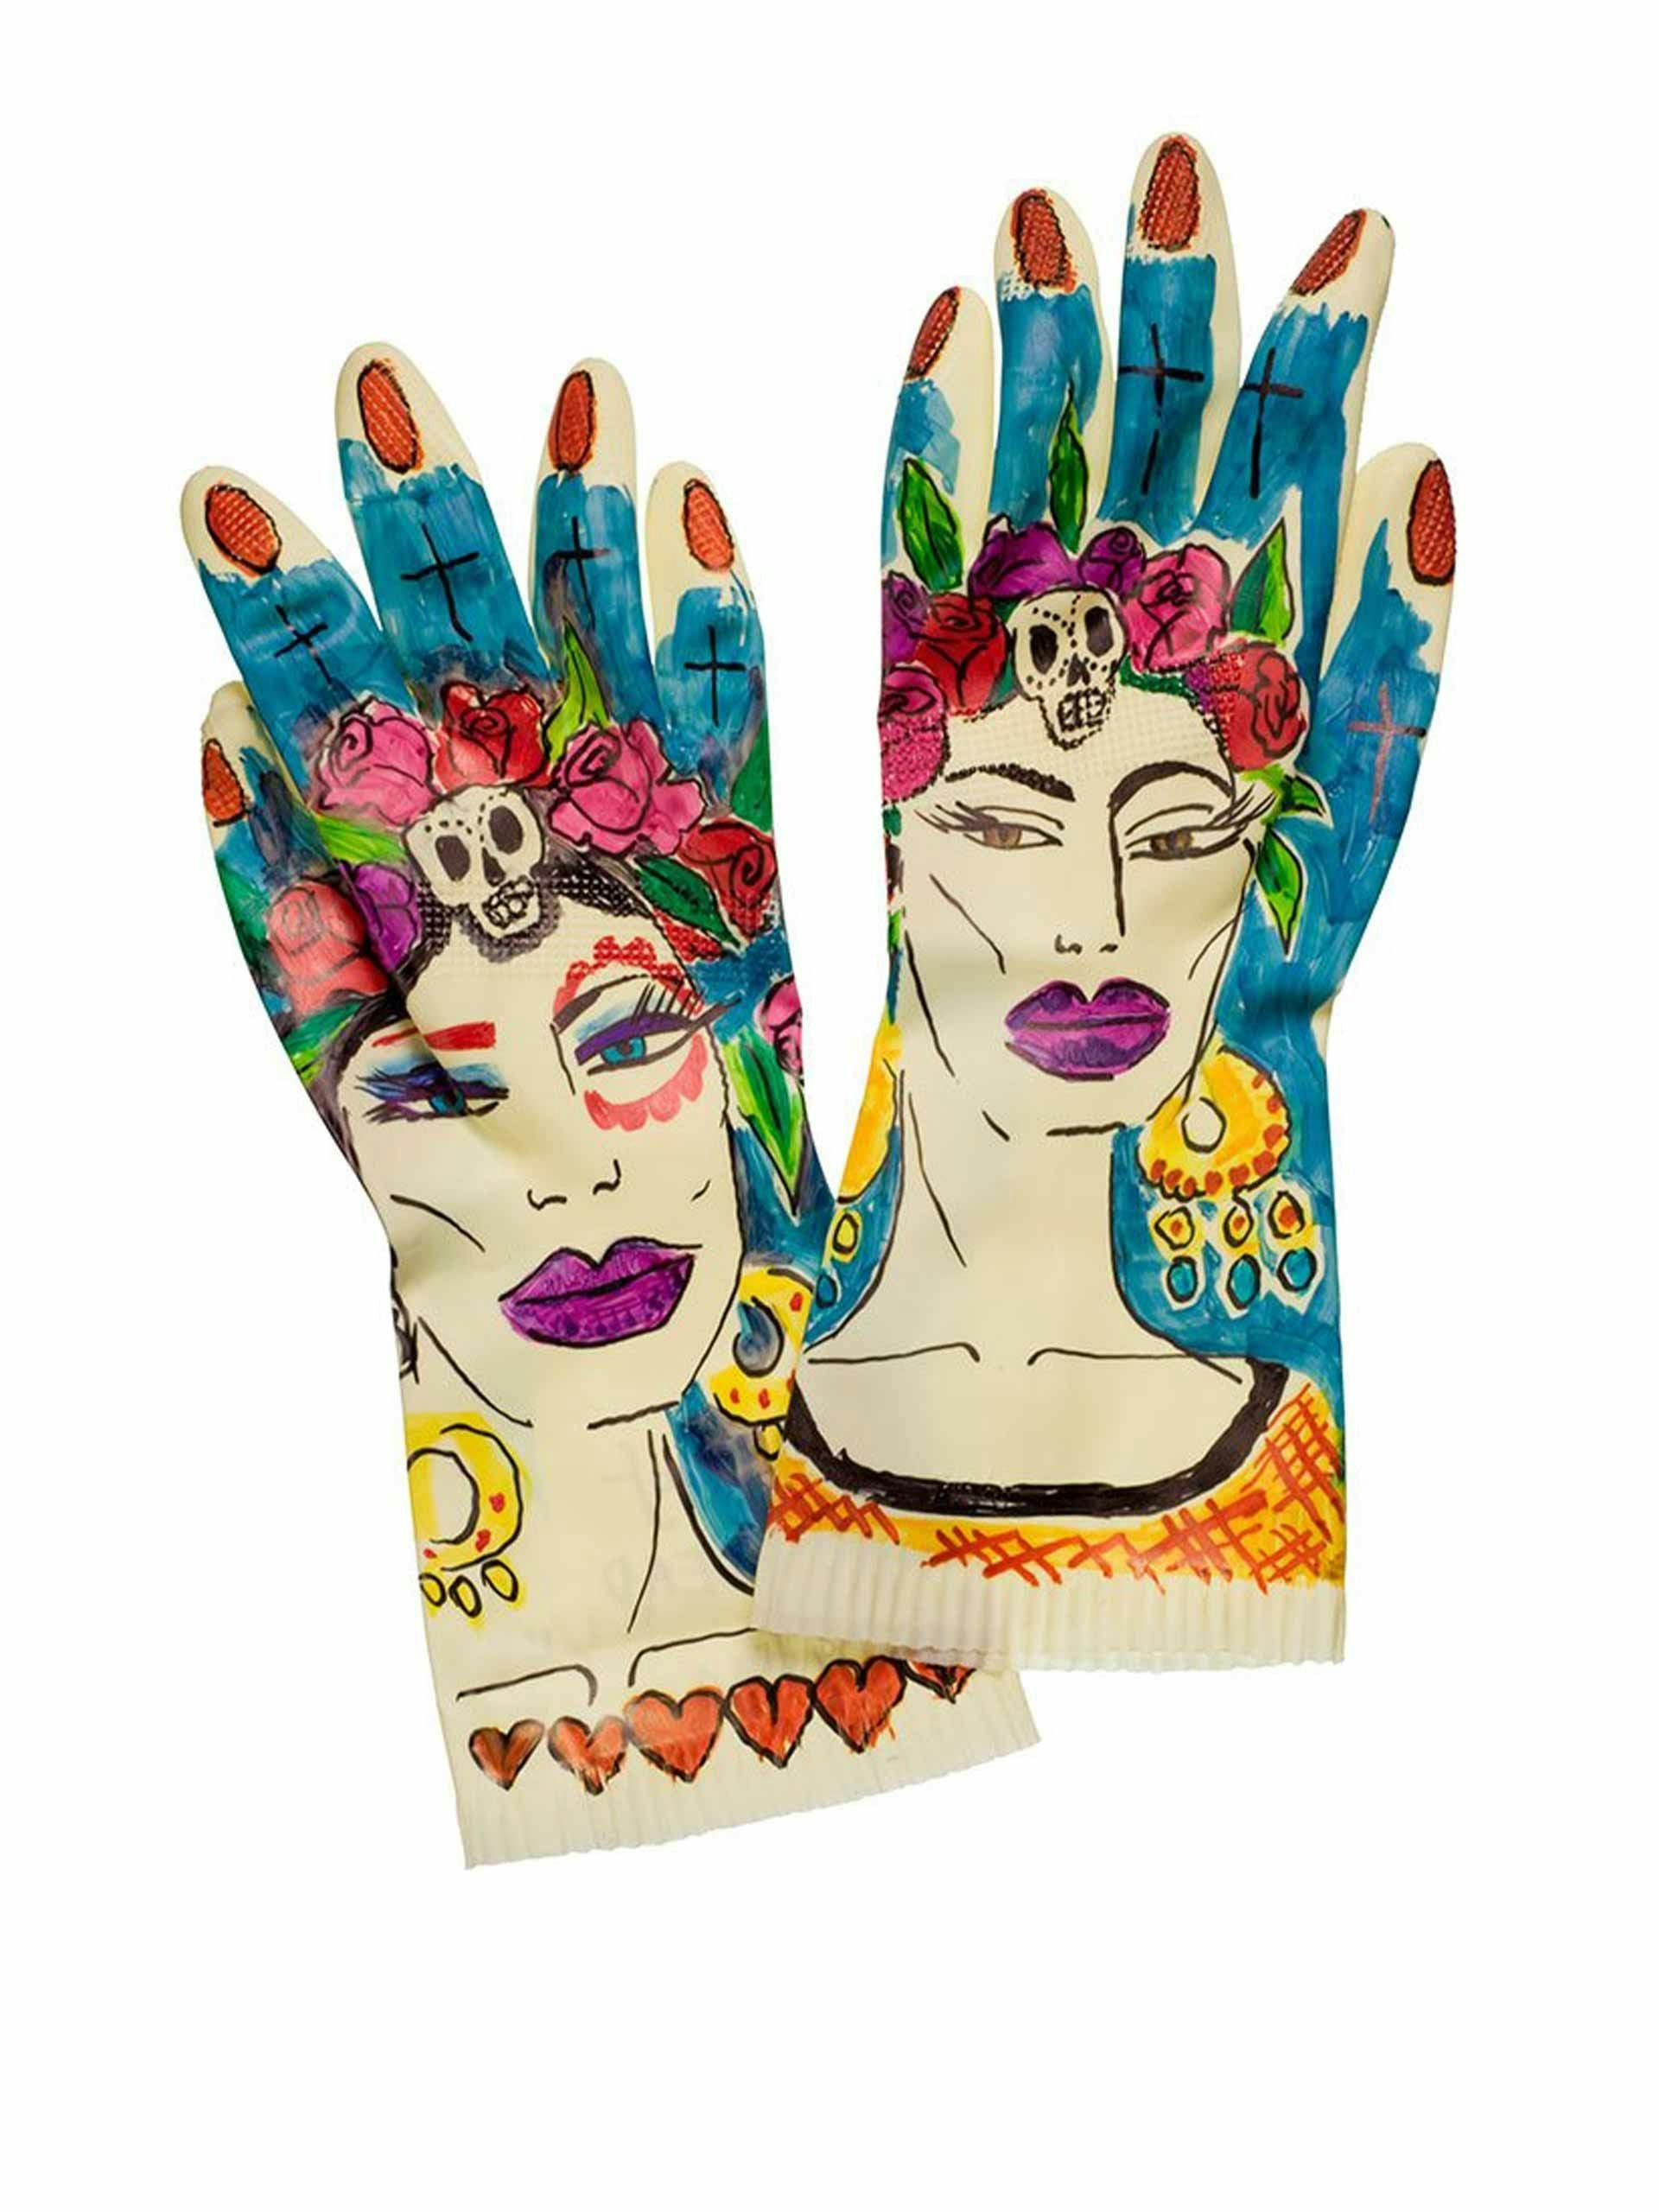 Limited edition hand drawn washing-up gloves